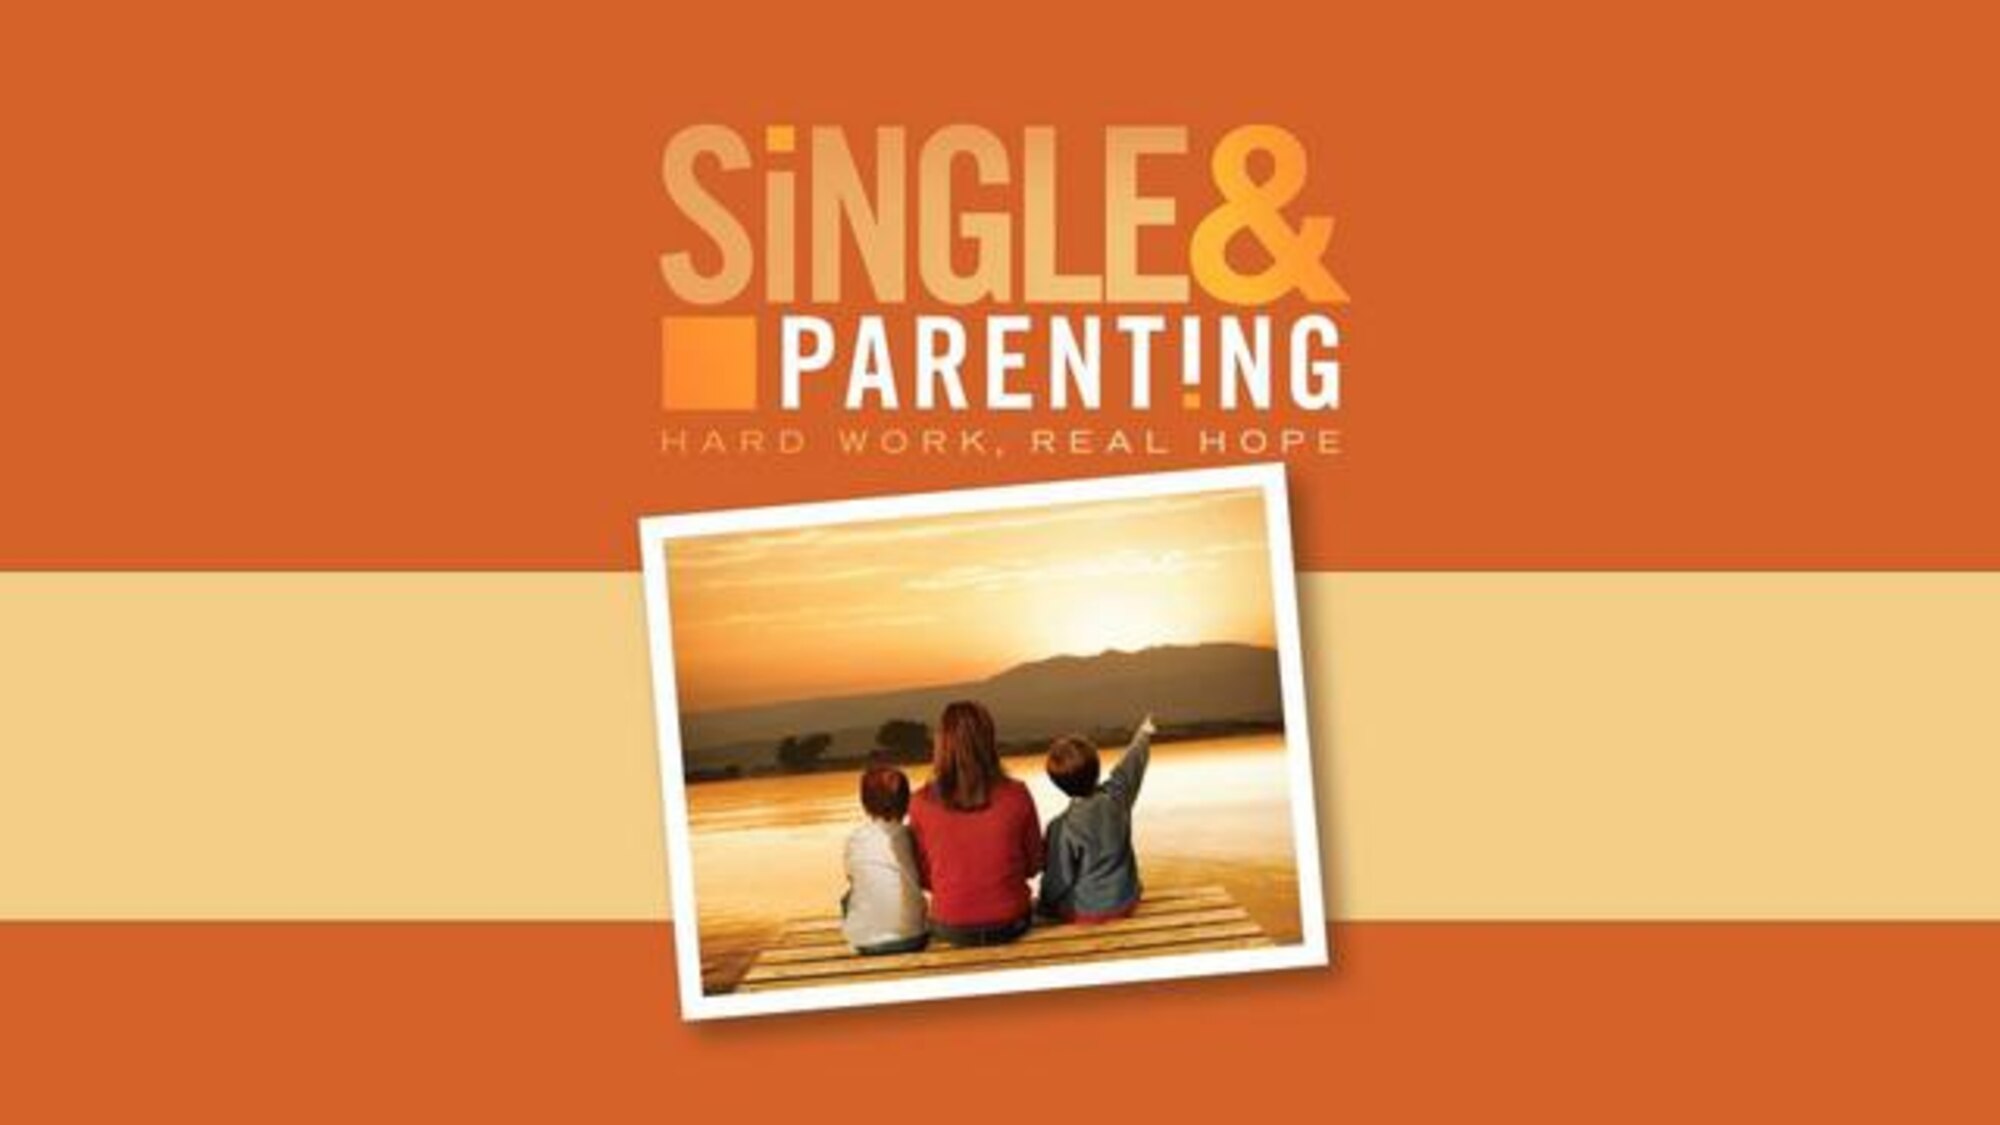 Single parents on active duty can experience feelings of isolation as they deal with the stressors that affect them and their families. However, Joint Base San Antonio Military & Family Readiness Centers are addressing the concerns of single parents and offering them a support network to help them better cope with the challenges they face.
